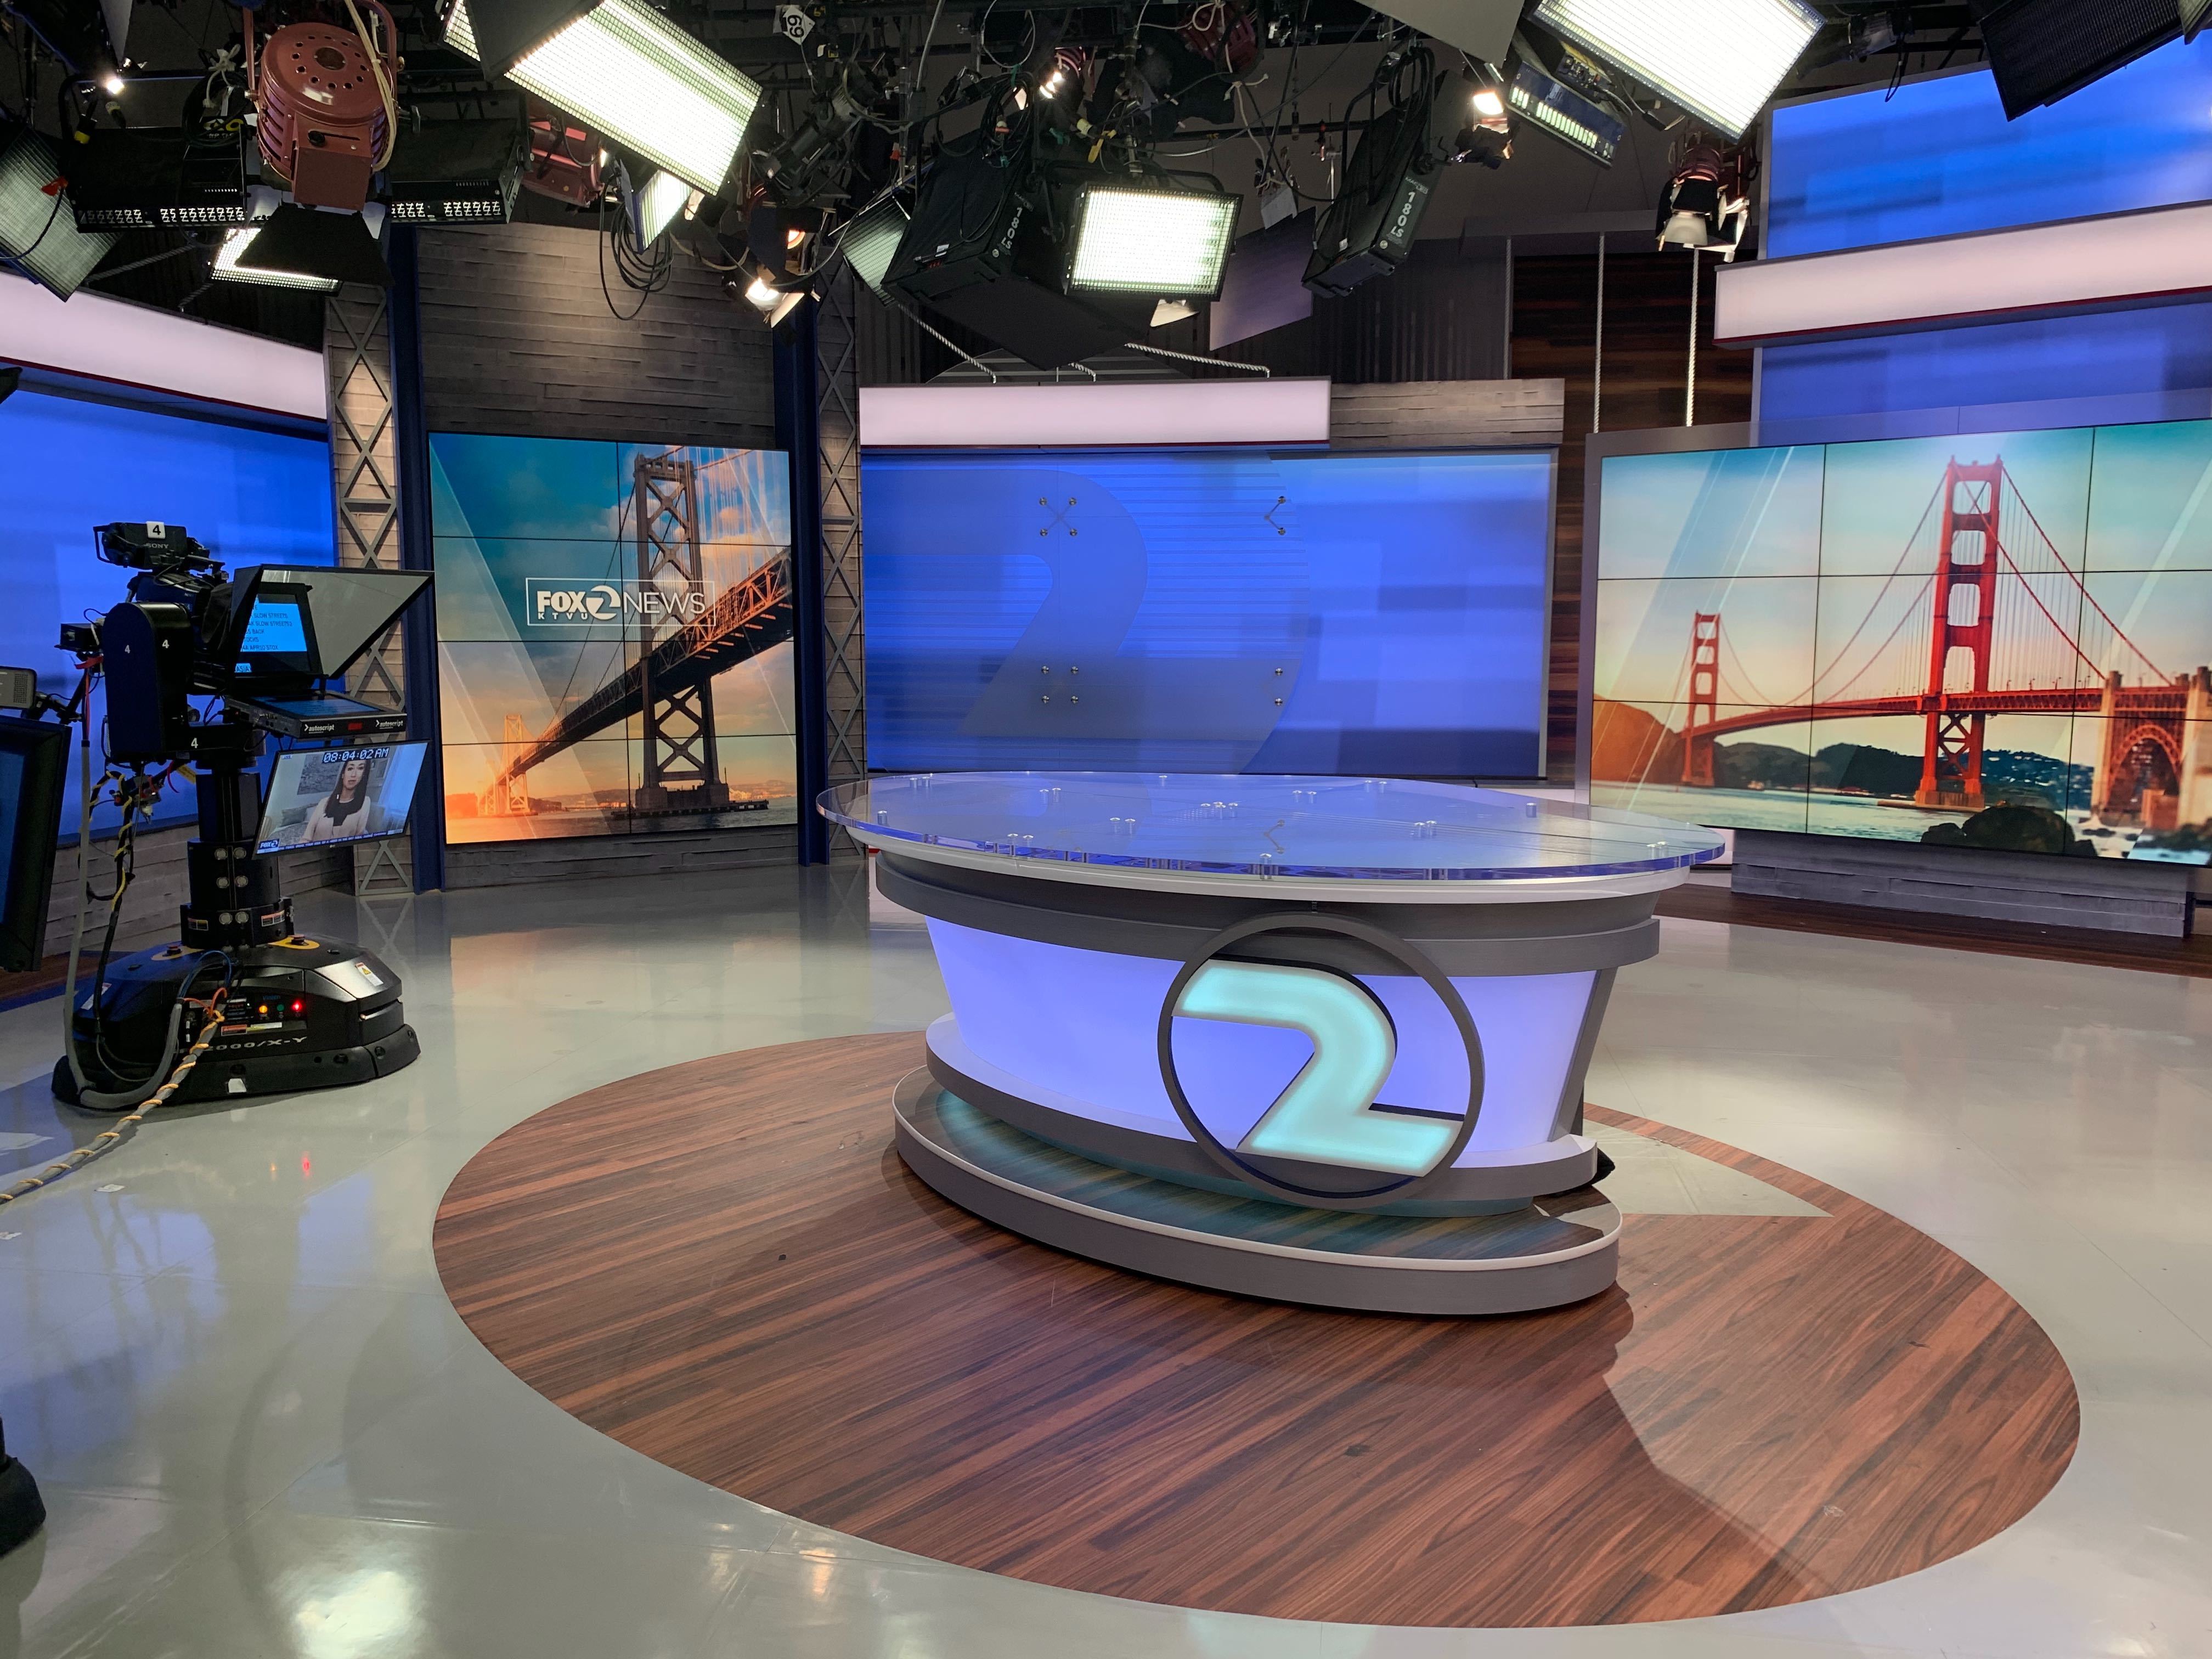 Ktvu Happy Monday Morning If You Re Searching For New Zoom Backgrounds This Week Here Are Some From Our Studio Enjoy T Co Hl4u3lwvdh Twitter